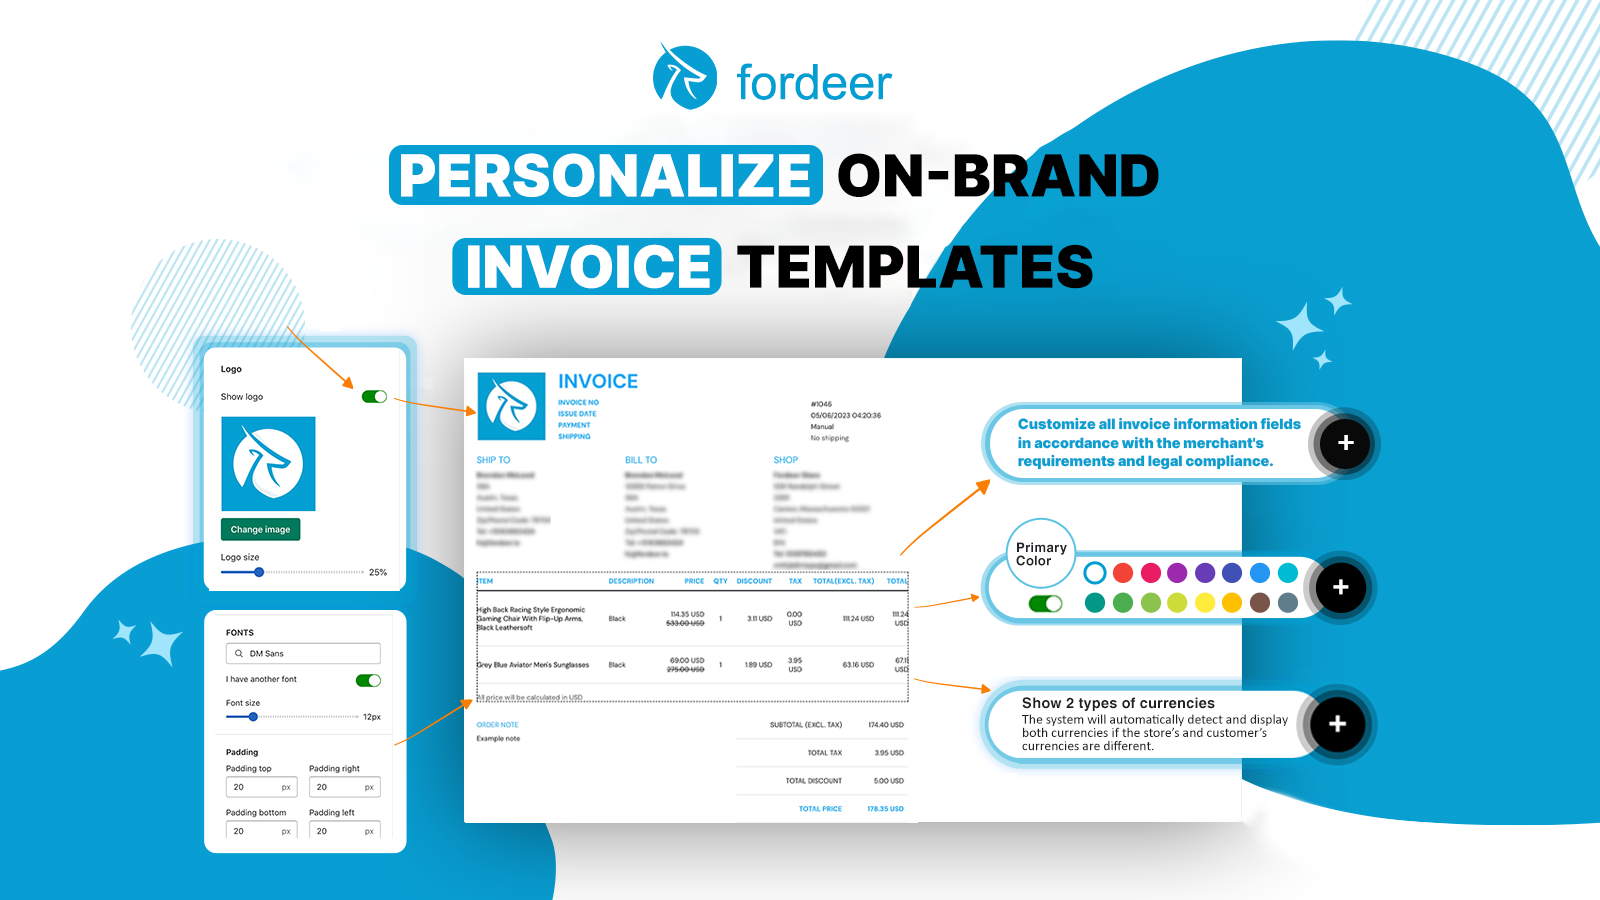 Personalize on-brand invoice templates